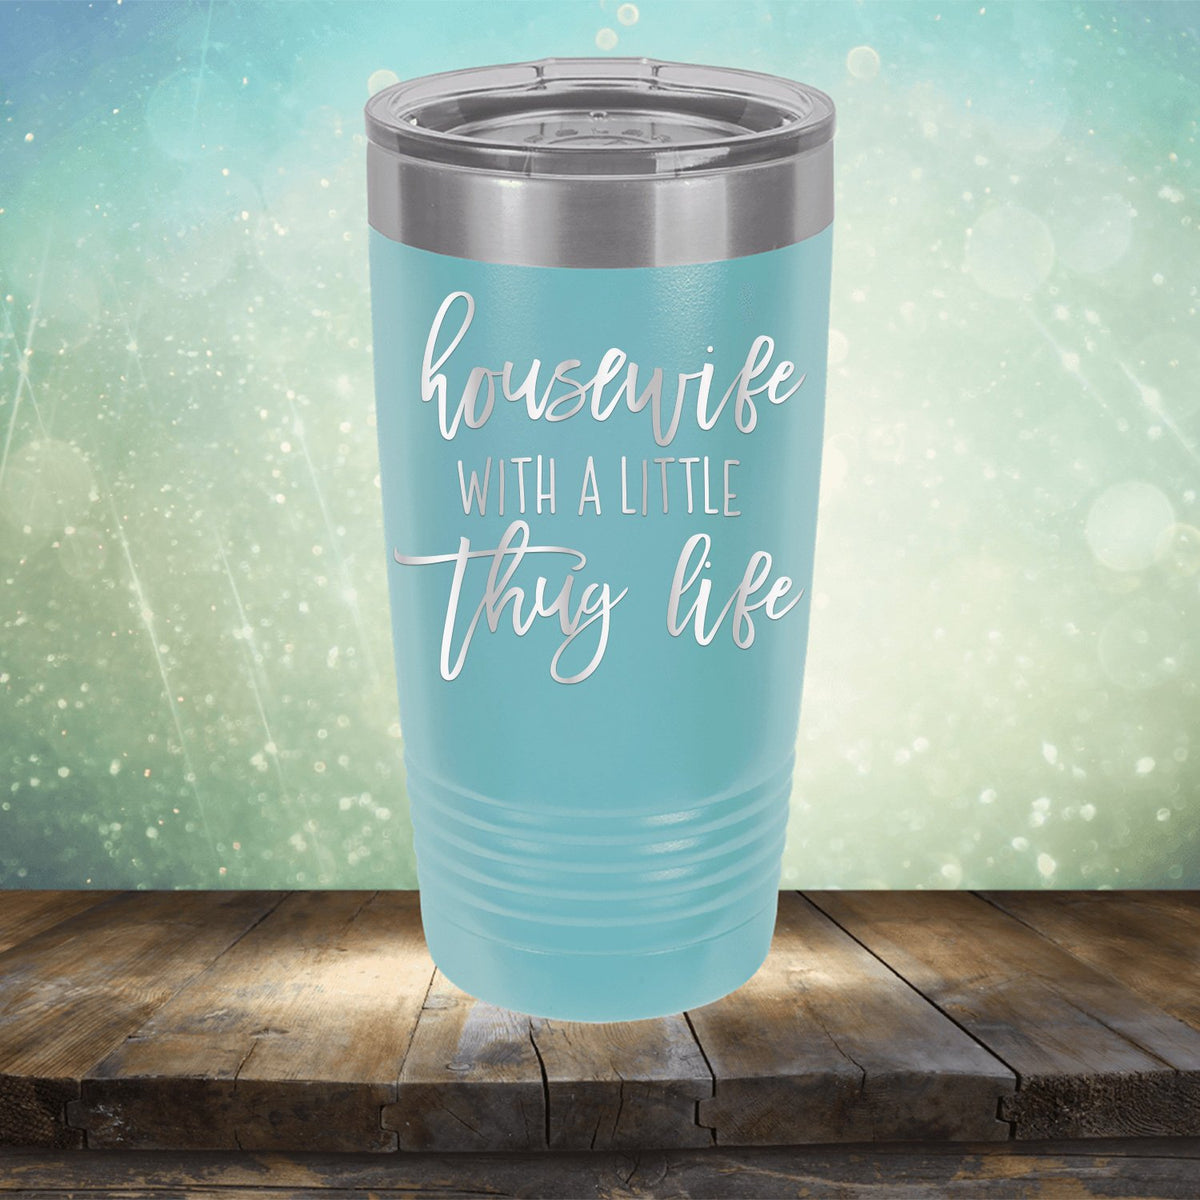 Housewife With A Little Thug Life - Laser Etched Tumbler Mug